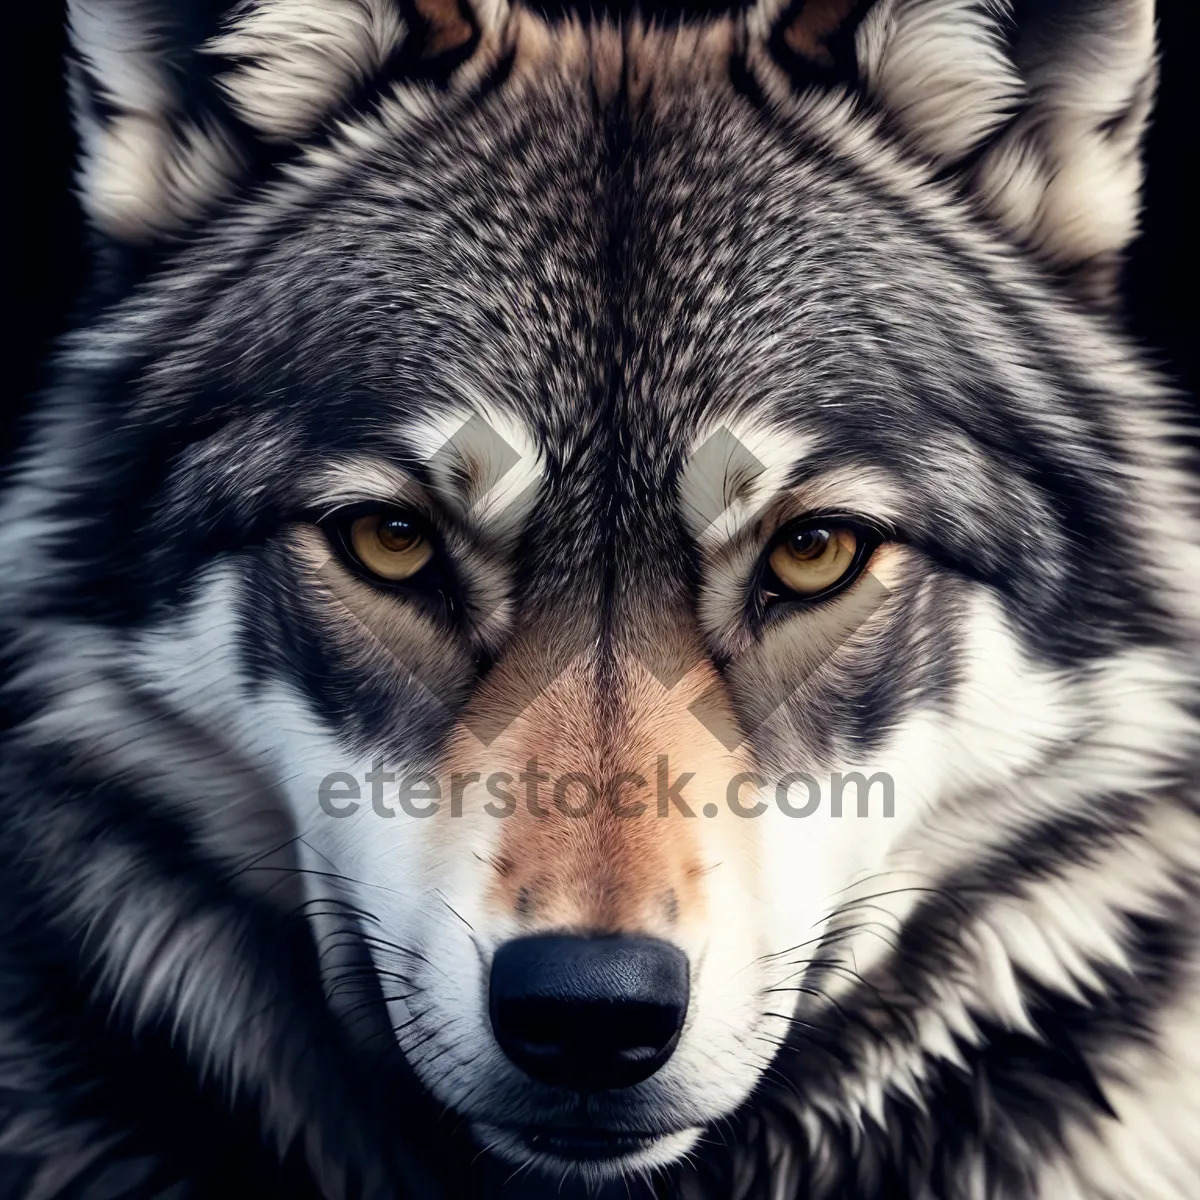 Picture of Enchanting Canine Gaze: Majestic Timber Wolf with Piercing Eyes